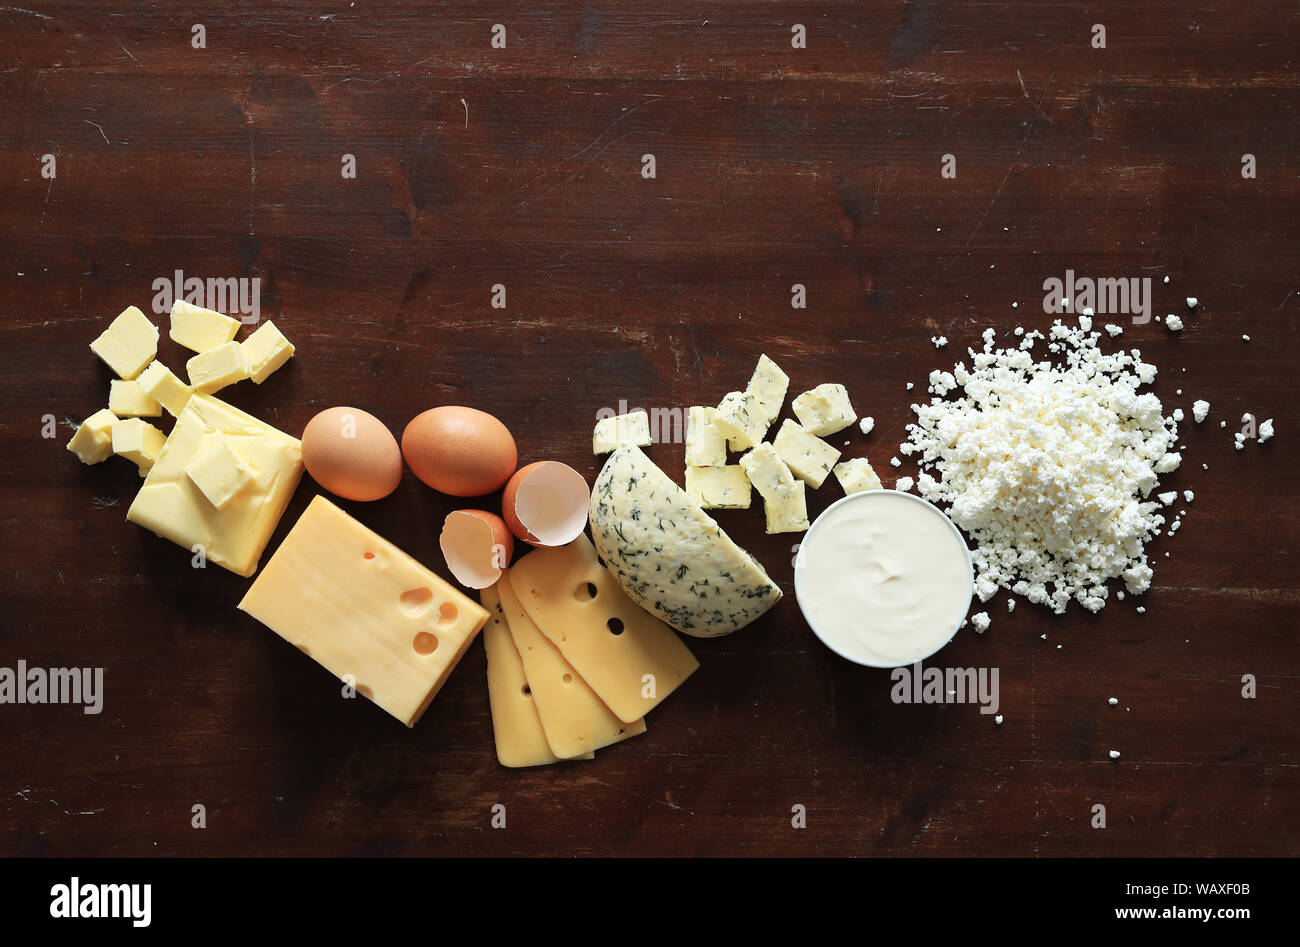 Dairy products on the table Stock Photo